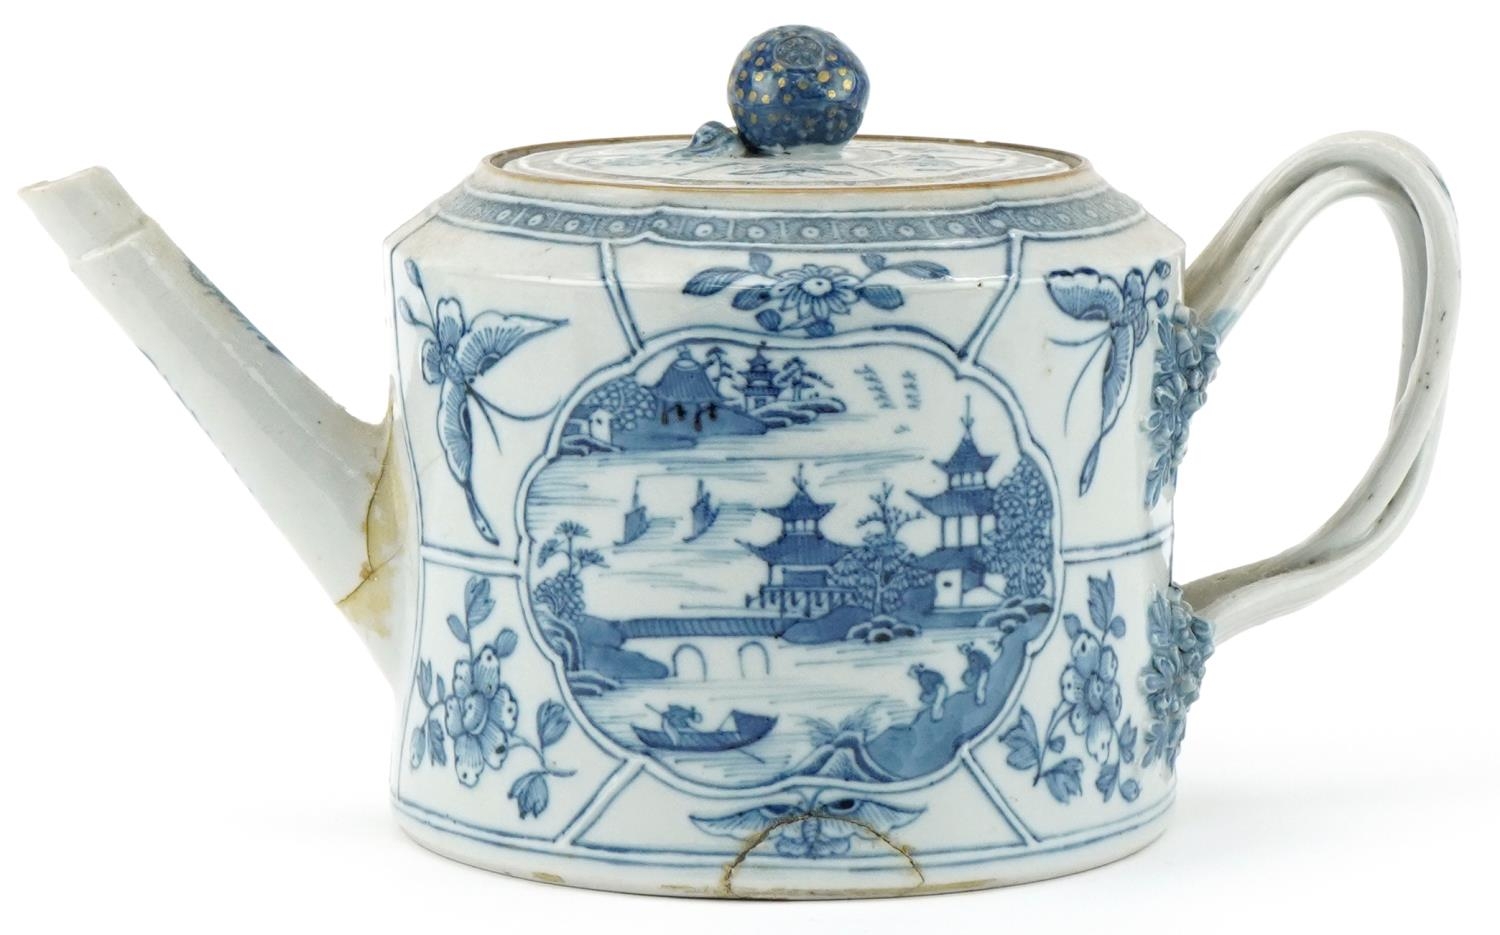 18th century Chinese porcelain teapot hand painted in the Willow pattern, 14cm high - Image 2 of 7